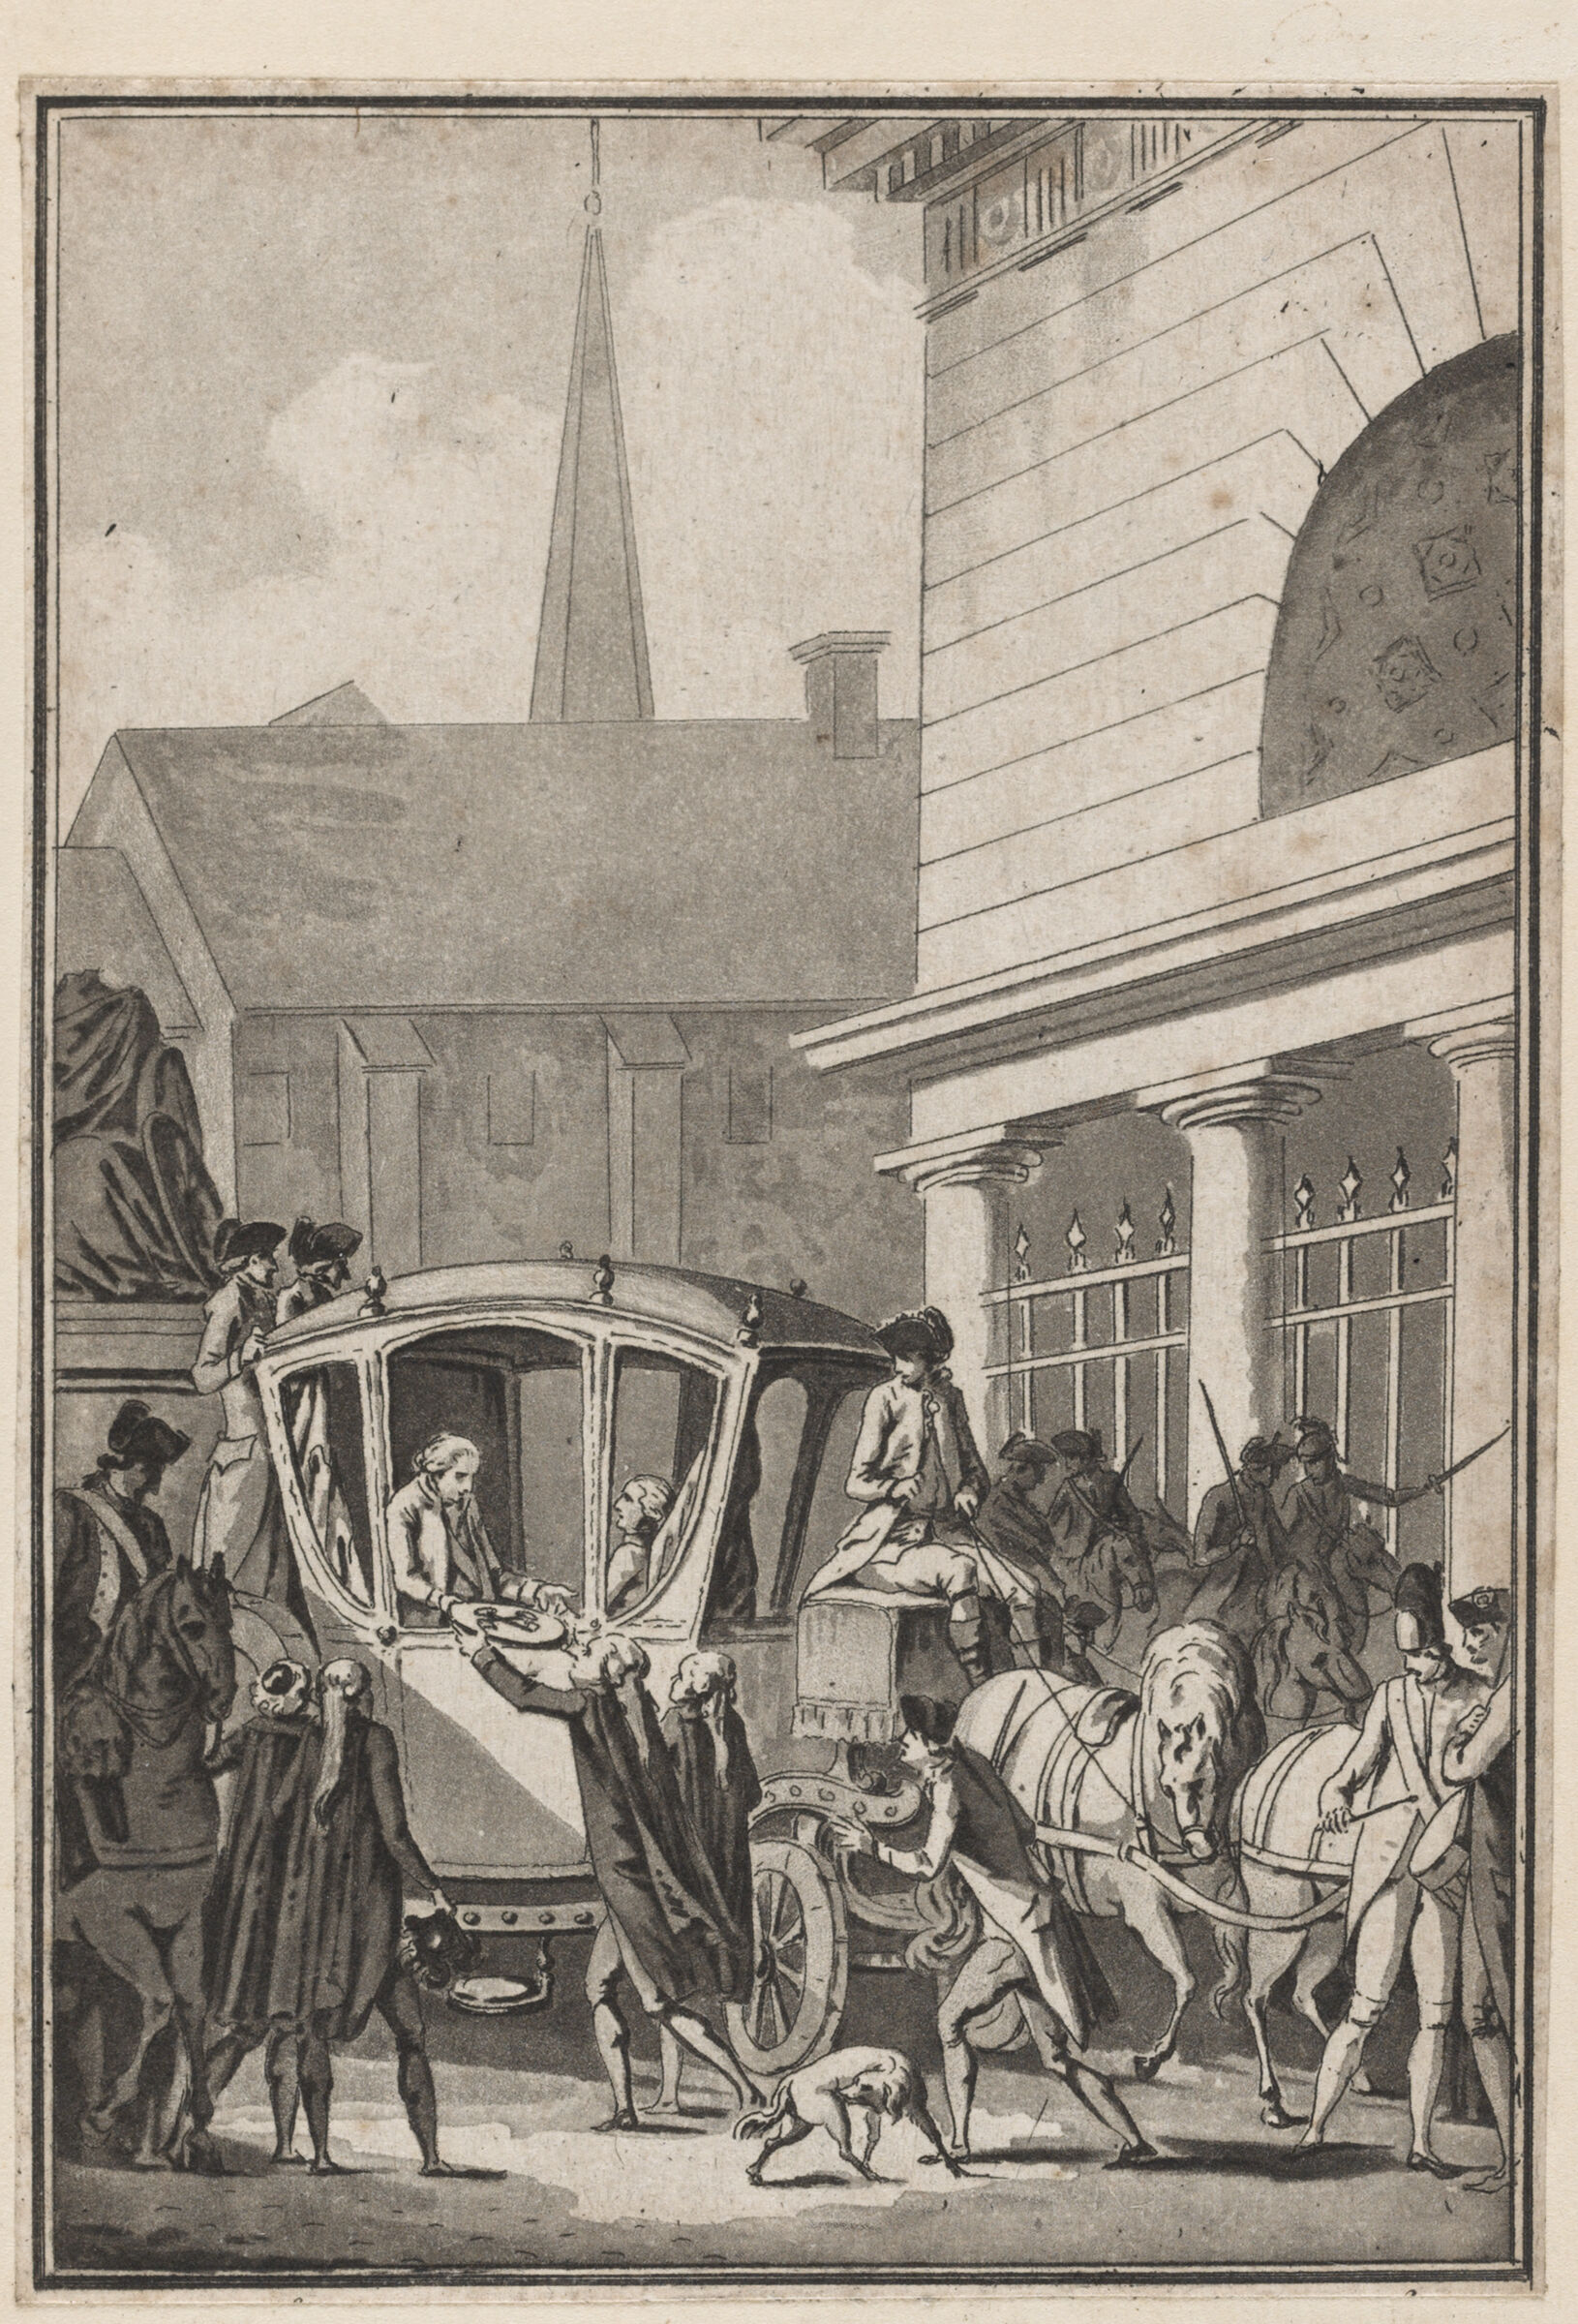 The Arrival Of Louis Xvi In The Capital Three Days After The Taking Of The Bastille (17 July 1789)